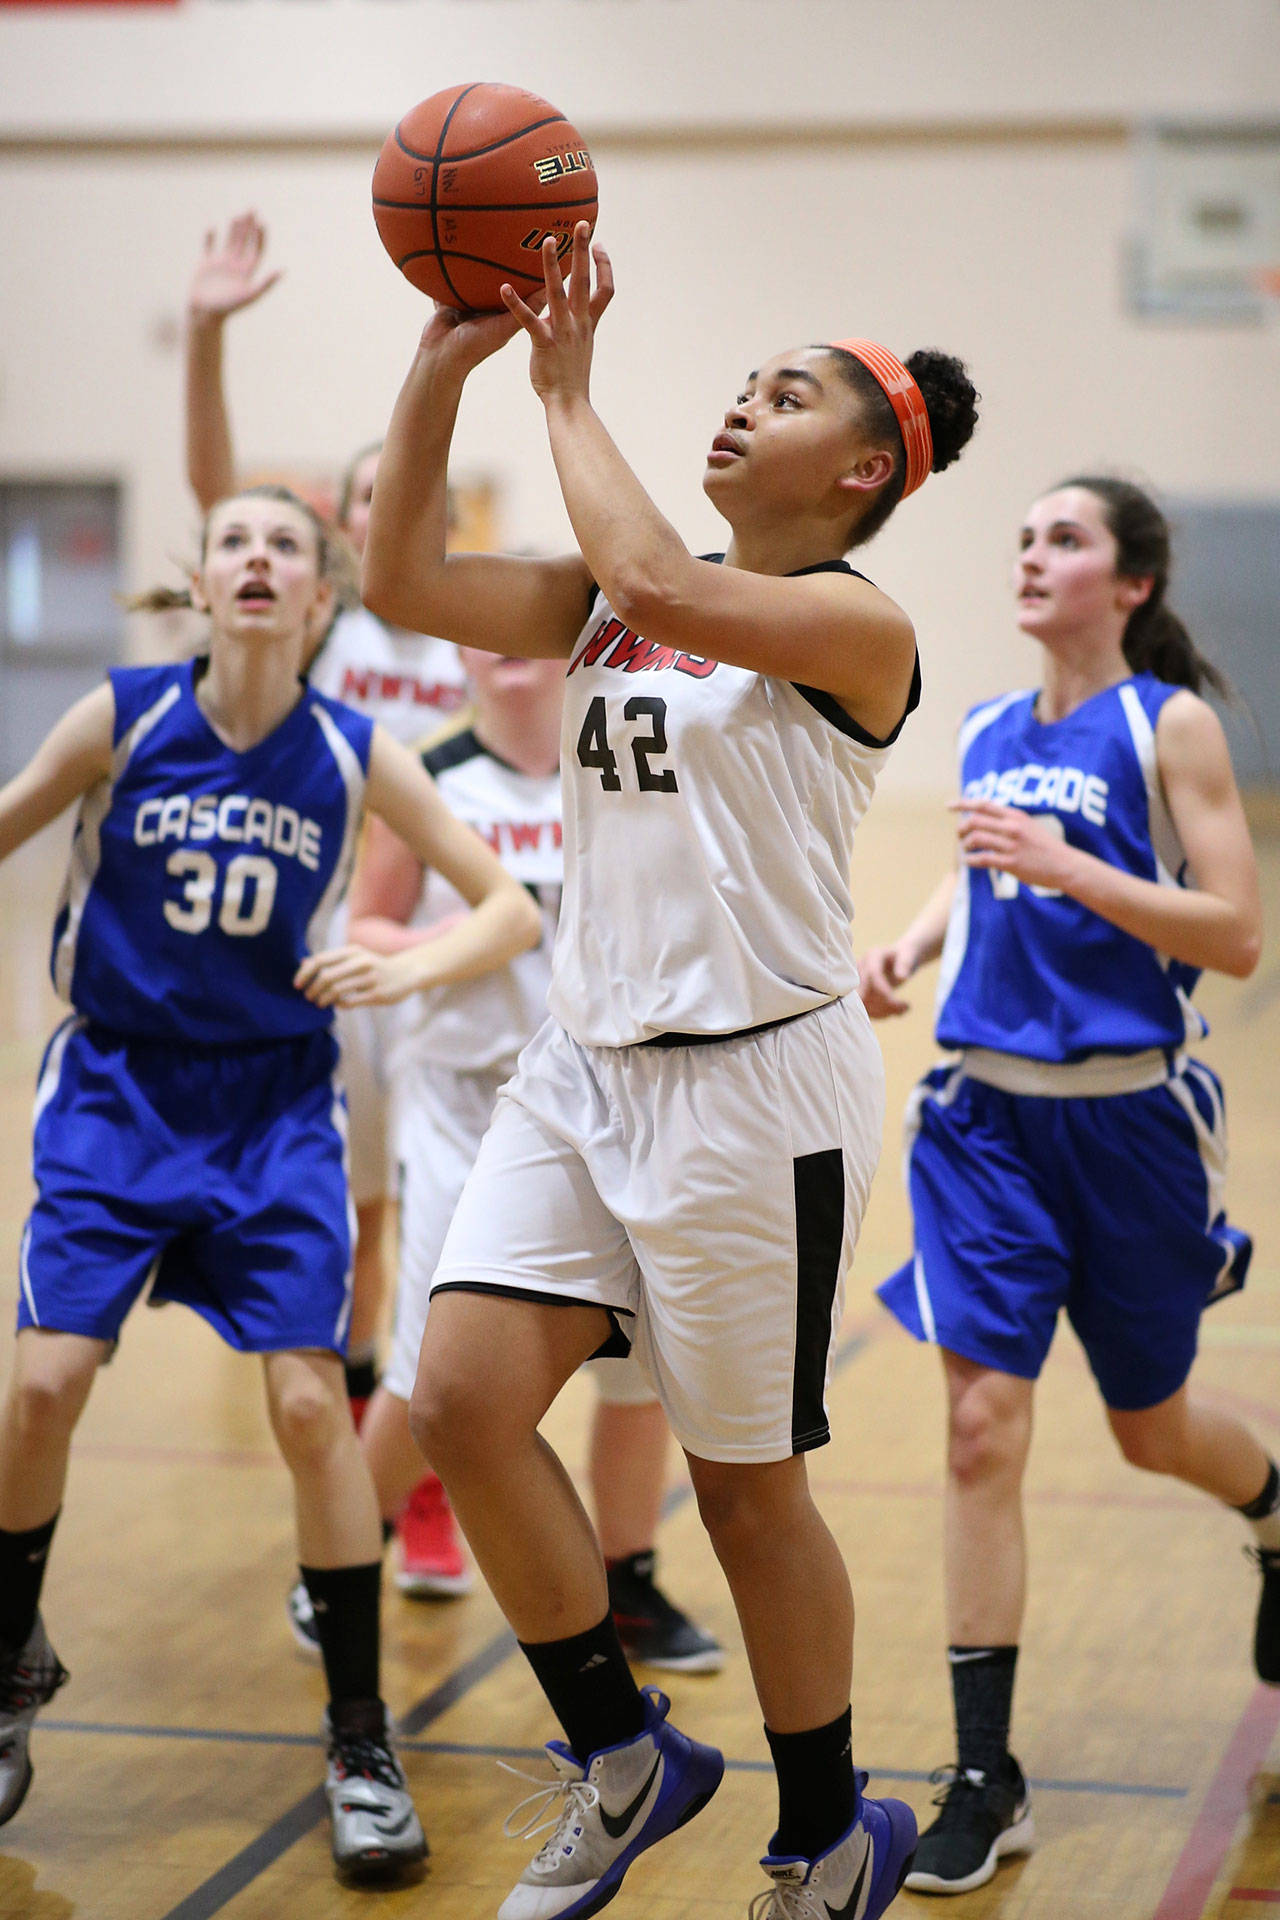 North Whidbey Middle School eighth-grader Tiana Jackson takes the ball to the hoop against Cascade Thursday. (Photo by John Fisken)